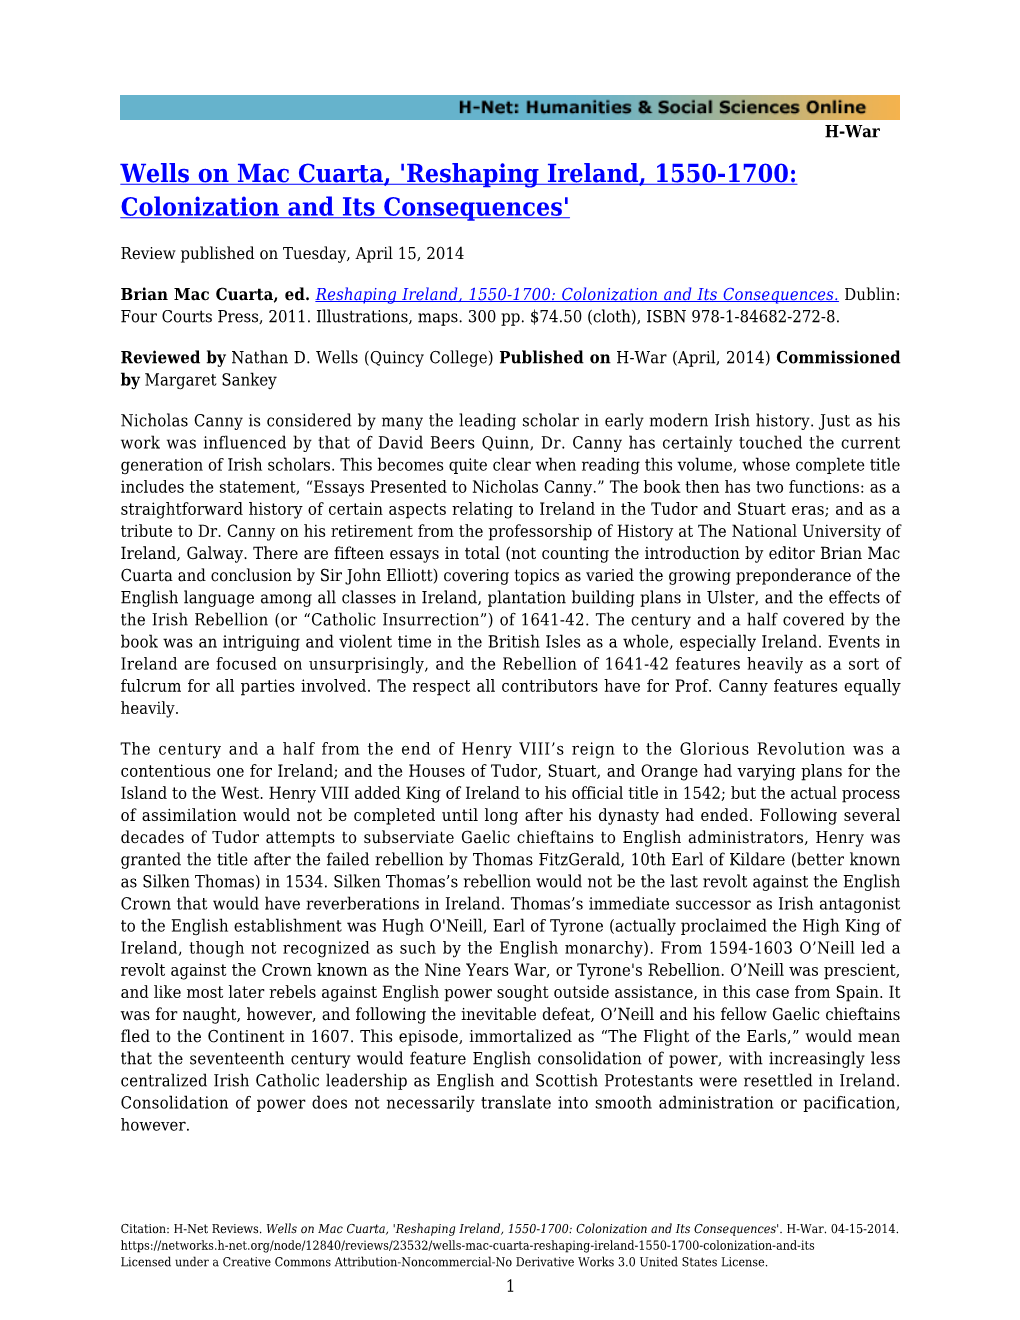 Wells on Mac Cuarta, 'Reshaping Ireland, 1550-1700: Colonization and Its Consequences'